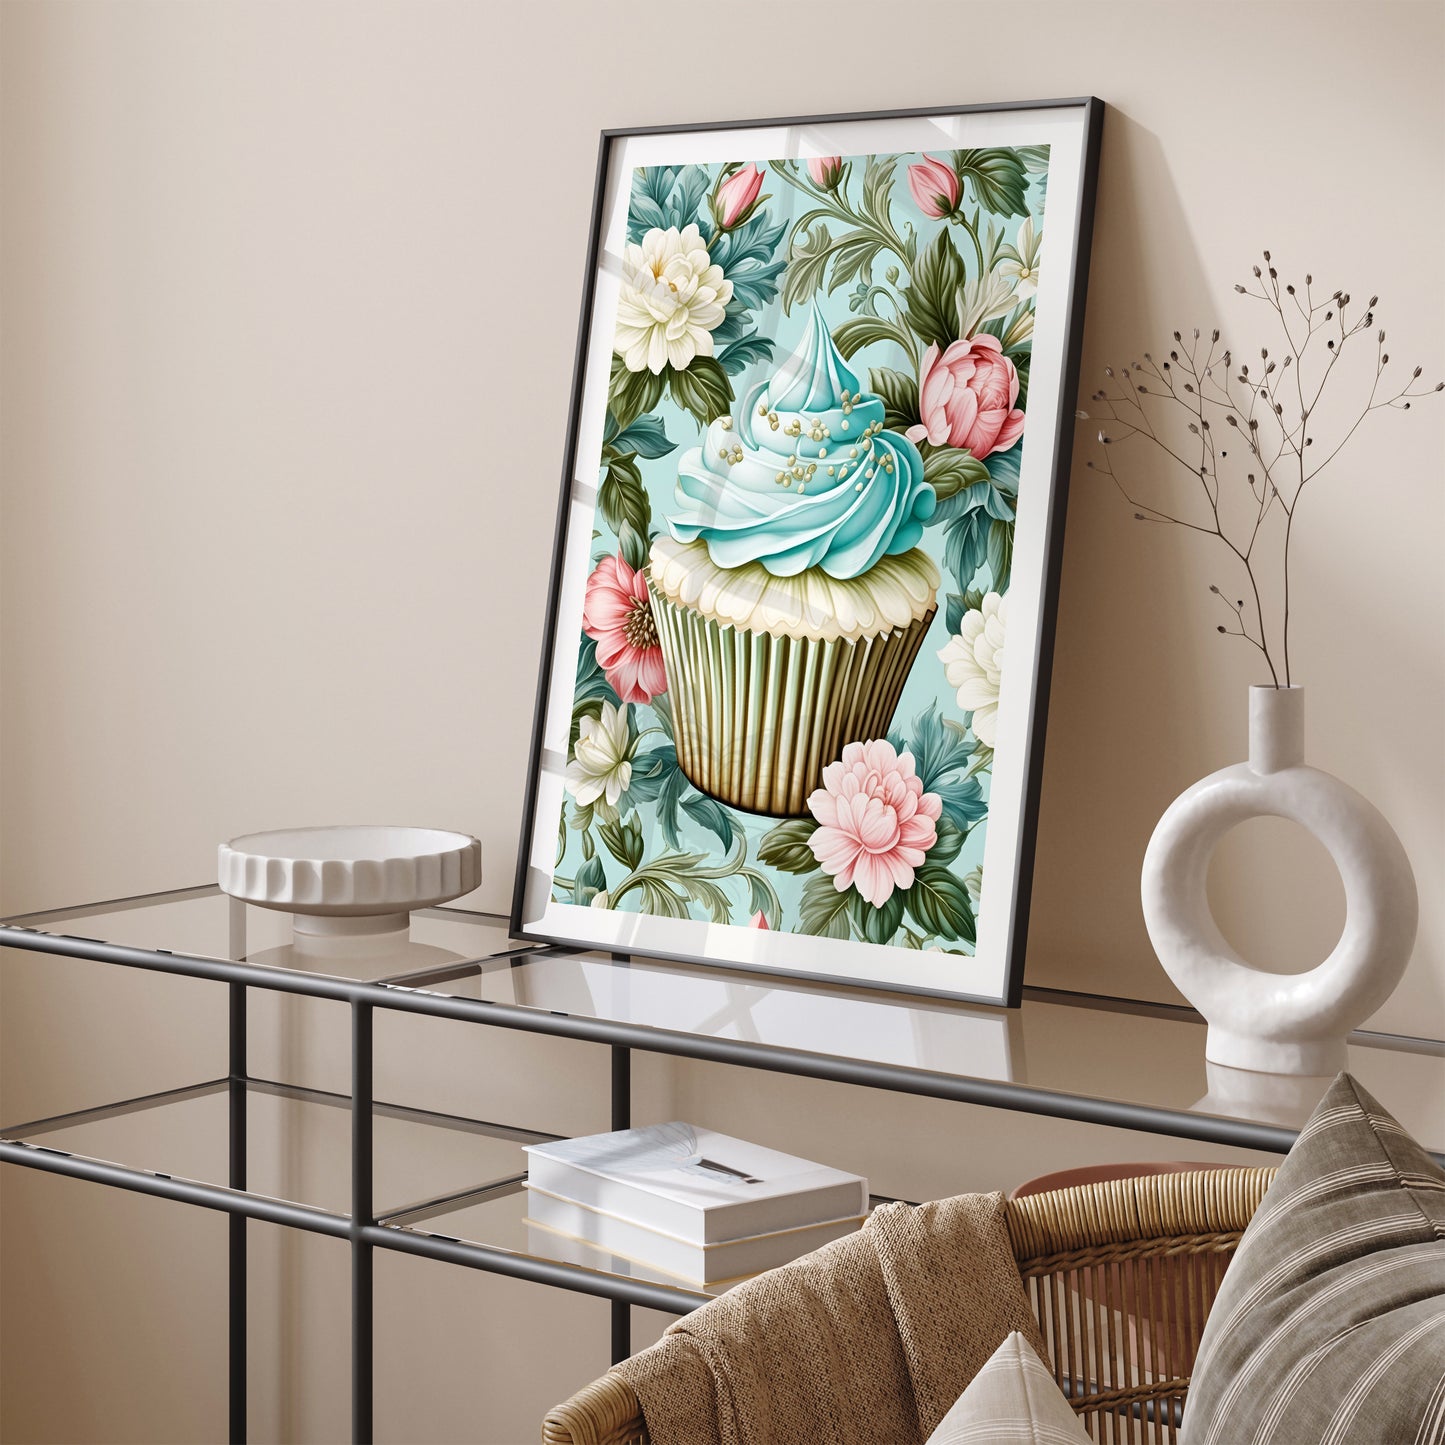 Whimsical Wall Decor for Bakery